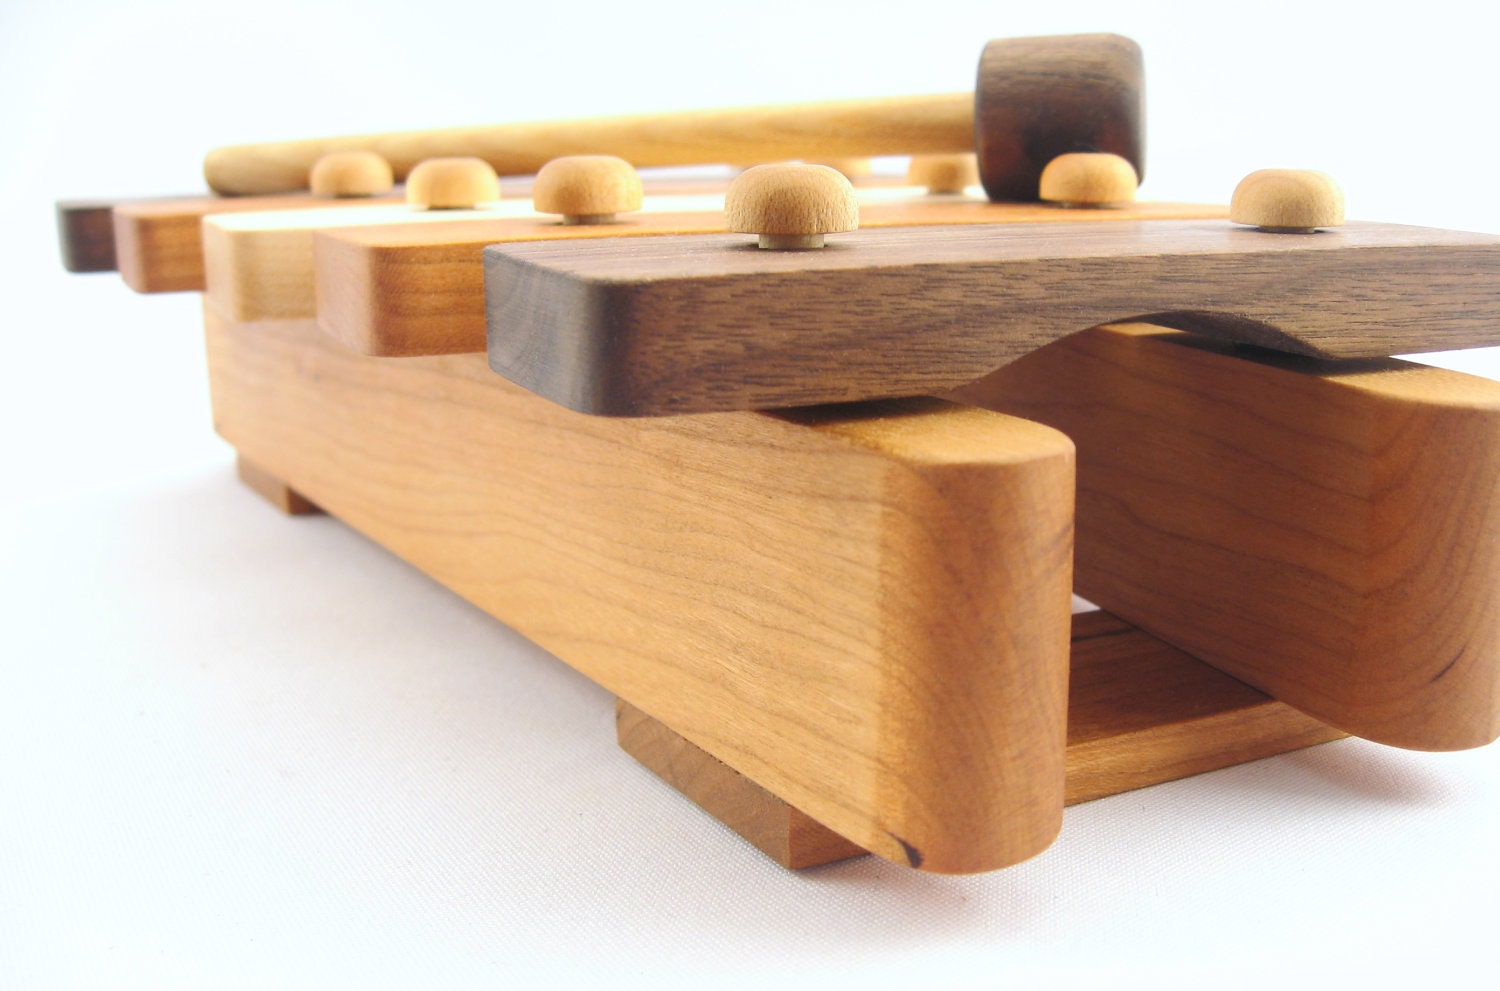 natural wooden xylphone toy - handmade musical piece for the montessori baby, earth friendly with homegrown organic finish